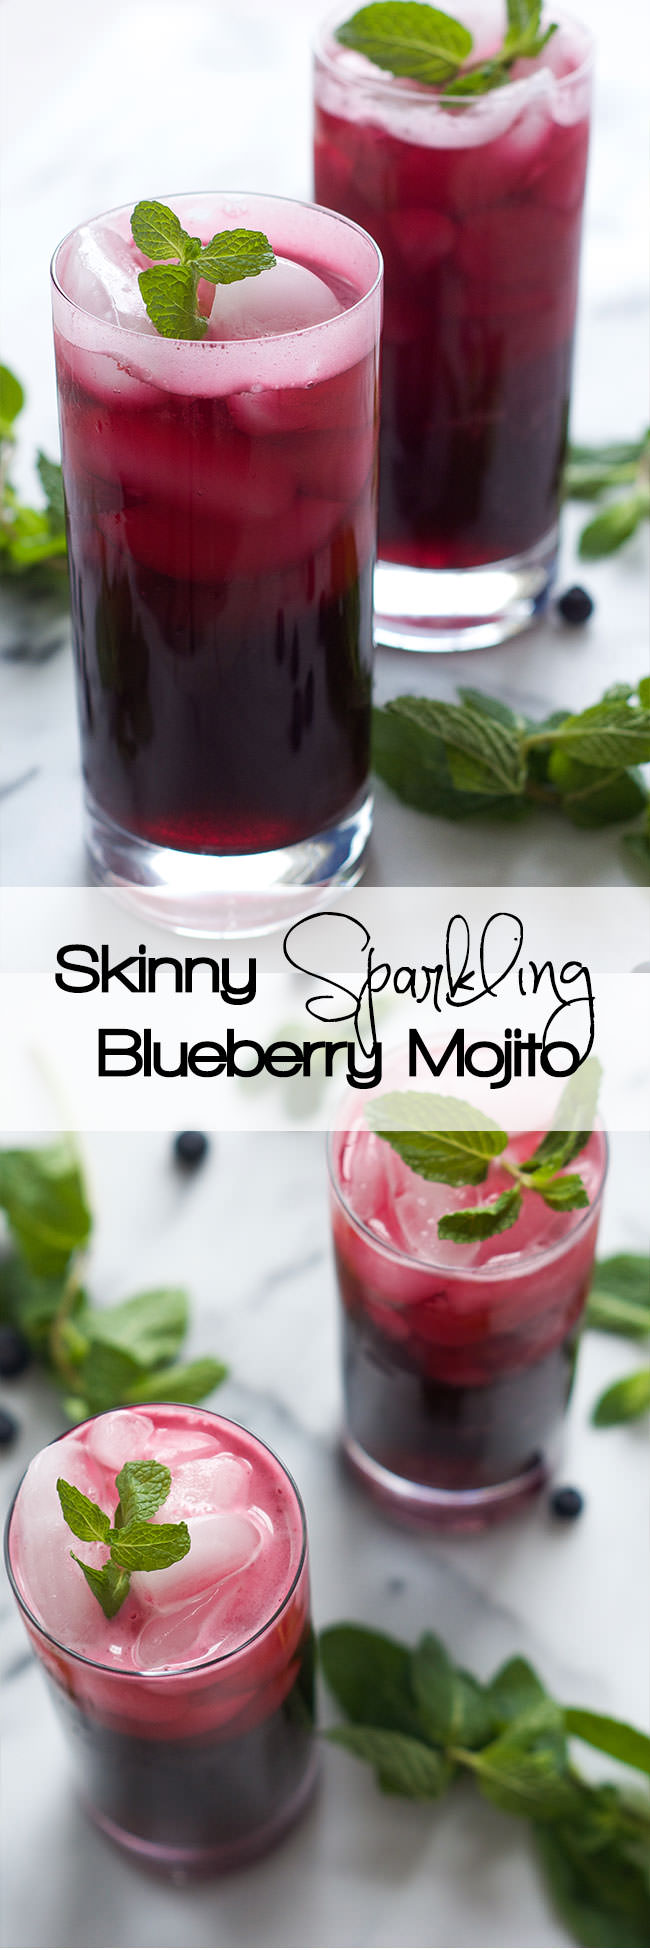 A fruity, summer staple just got made over! Skinny Sparkling Blueberry Mojito is fruity, minty and super refreshing when made with a homemade blueberry simple syrup and topped with sparkling water! 